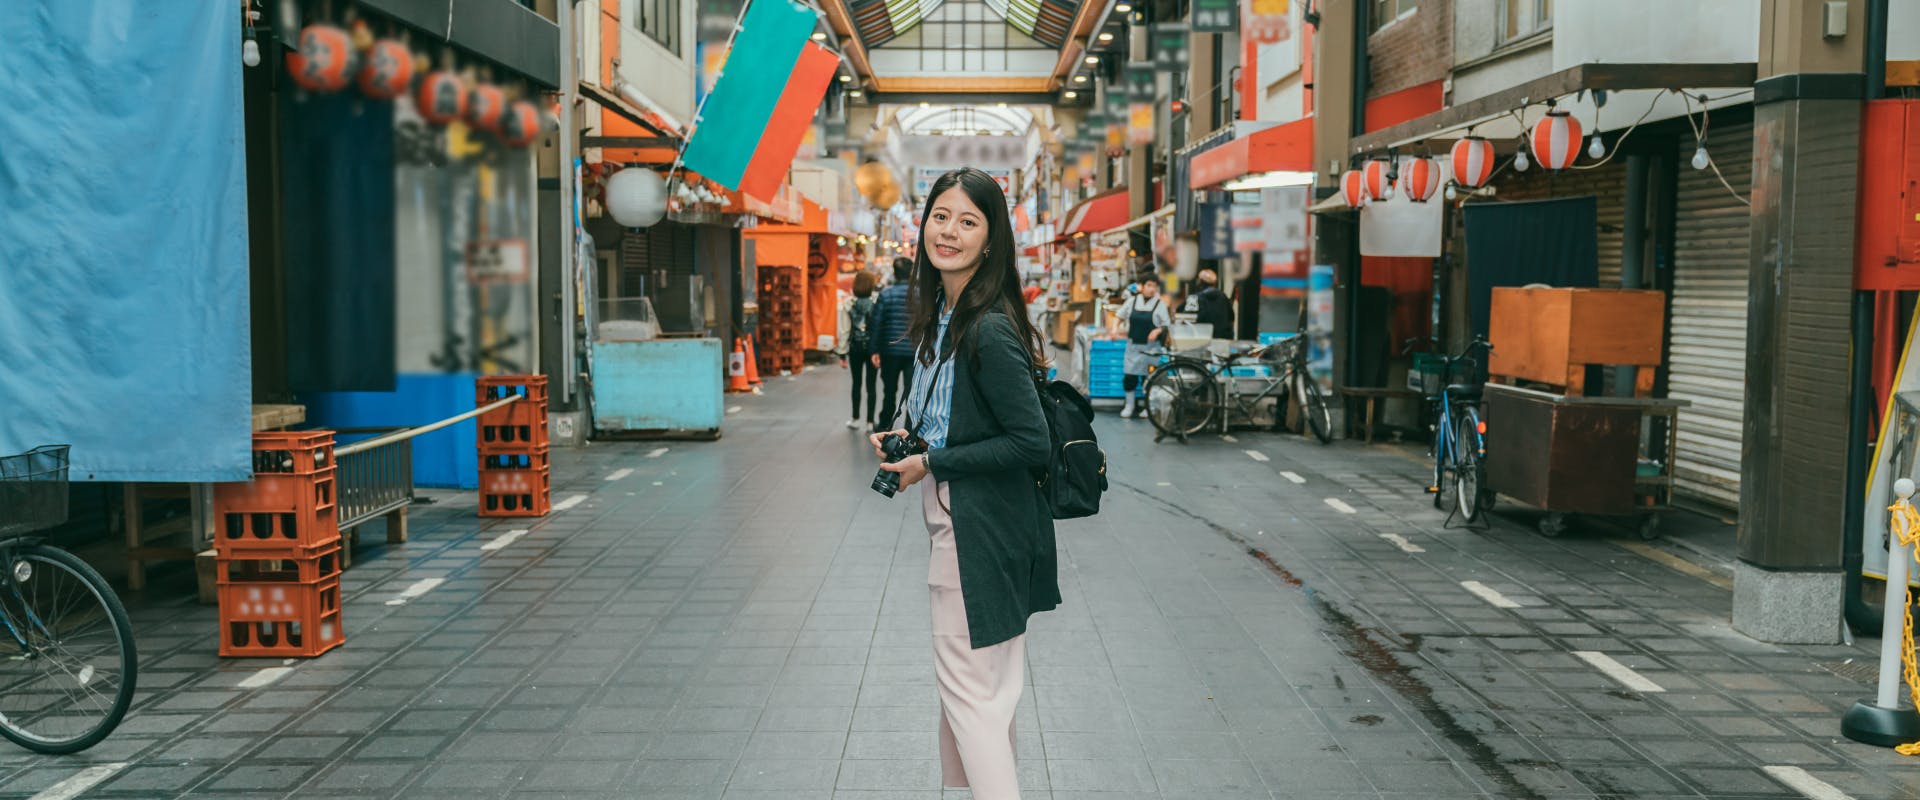 A woman walks through the streets of Tokyo.